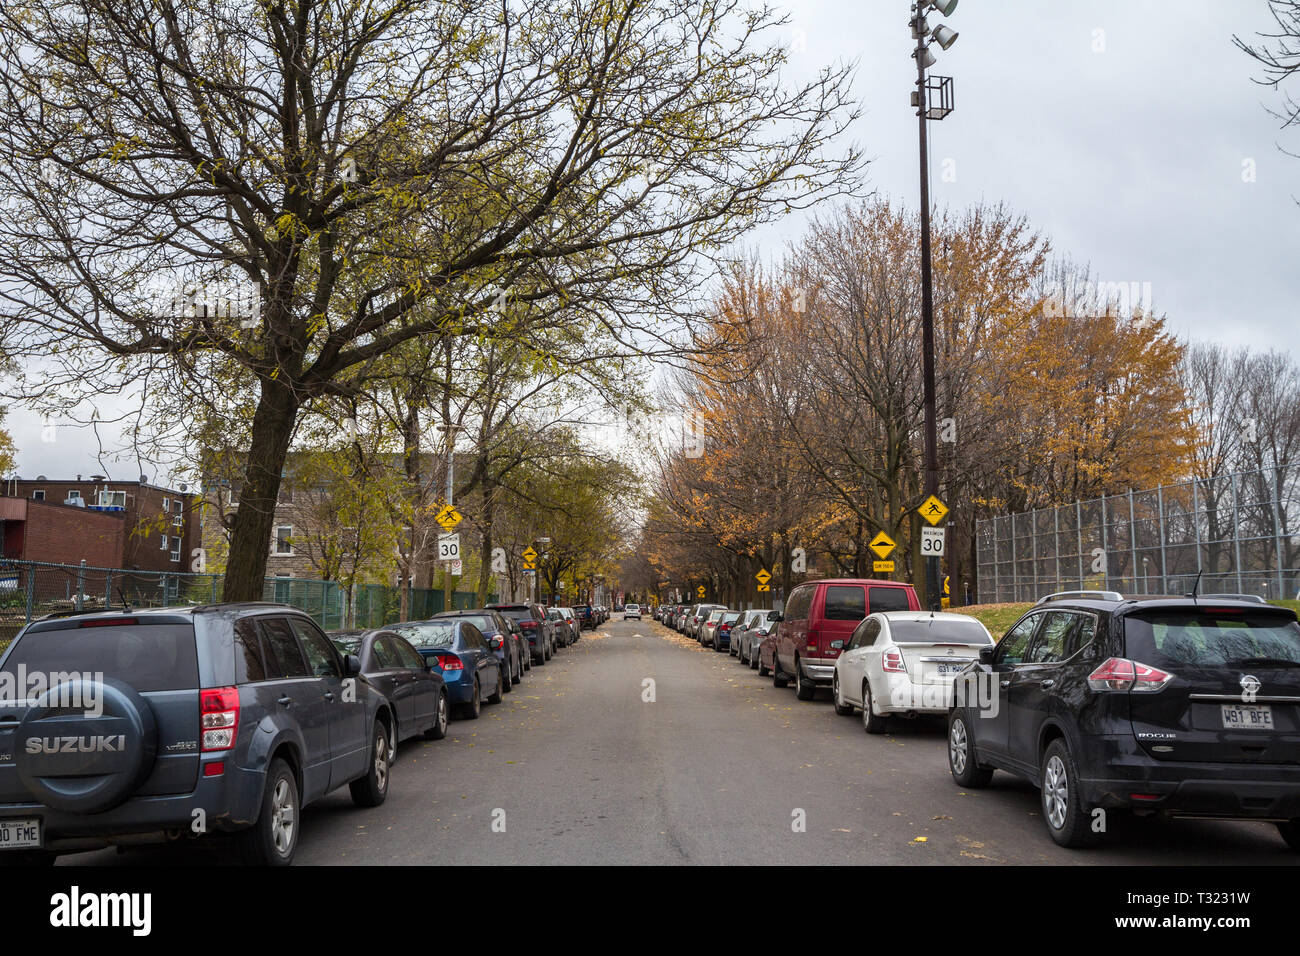 MONTREAL, CANADA - NOVEMBER 9, 2018: Typical north American residential street in autumn in Cote des Neiges Montreal, Quebec, during an autumn afterno Stock Photo